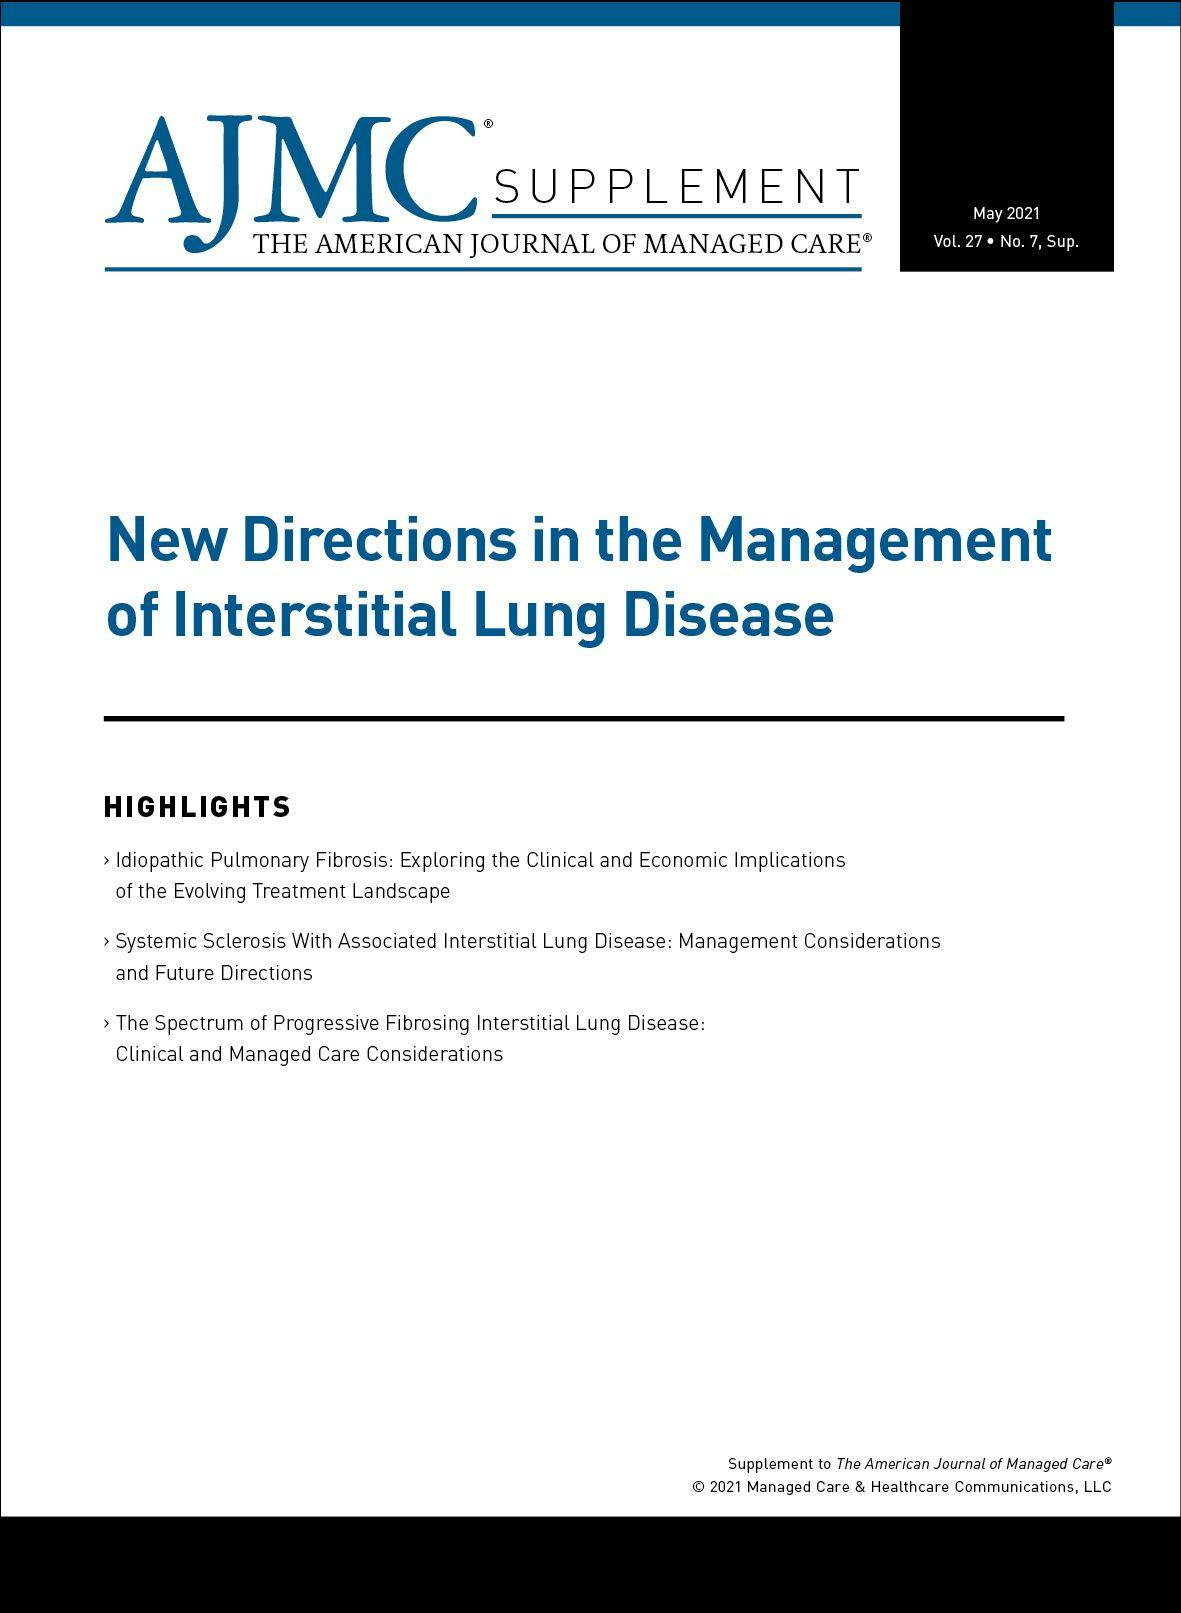 New Directions in the Management of Interstitial Lung Disease